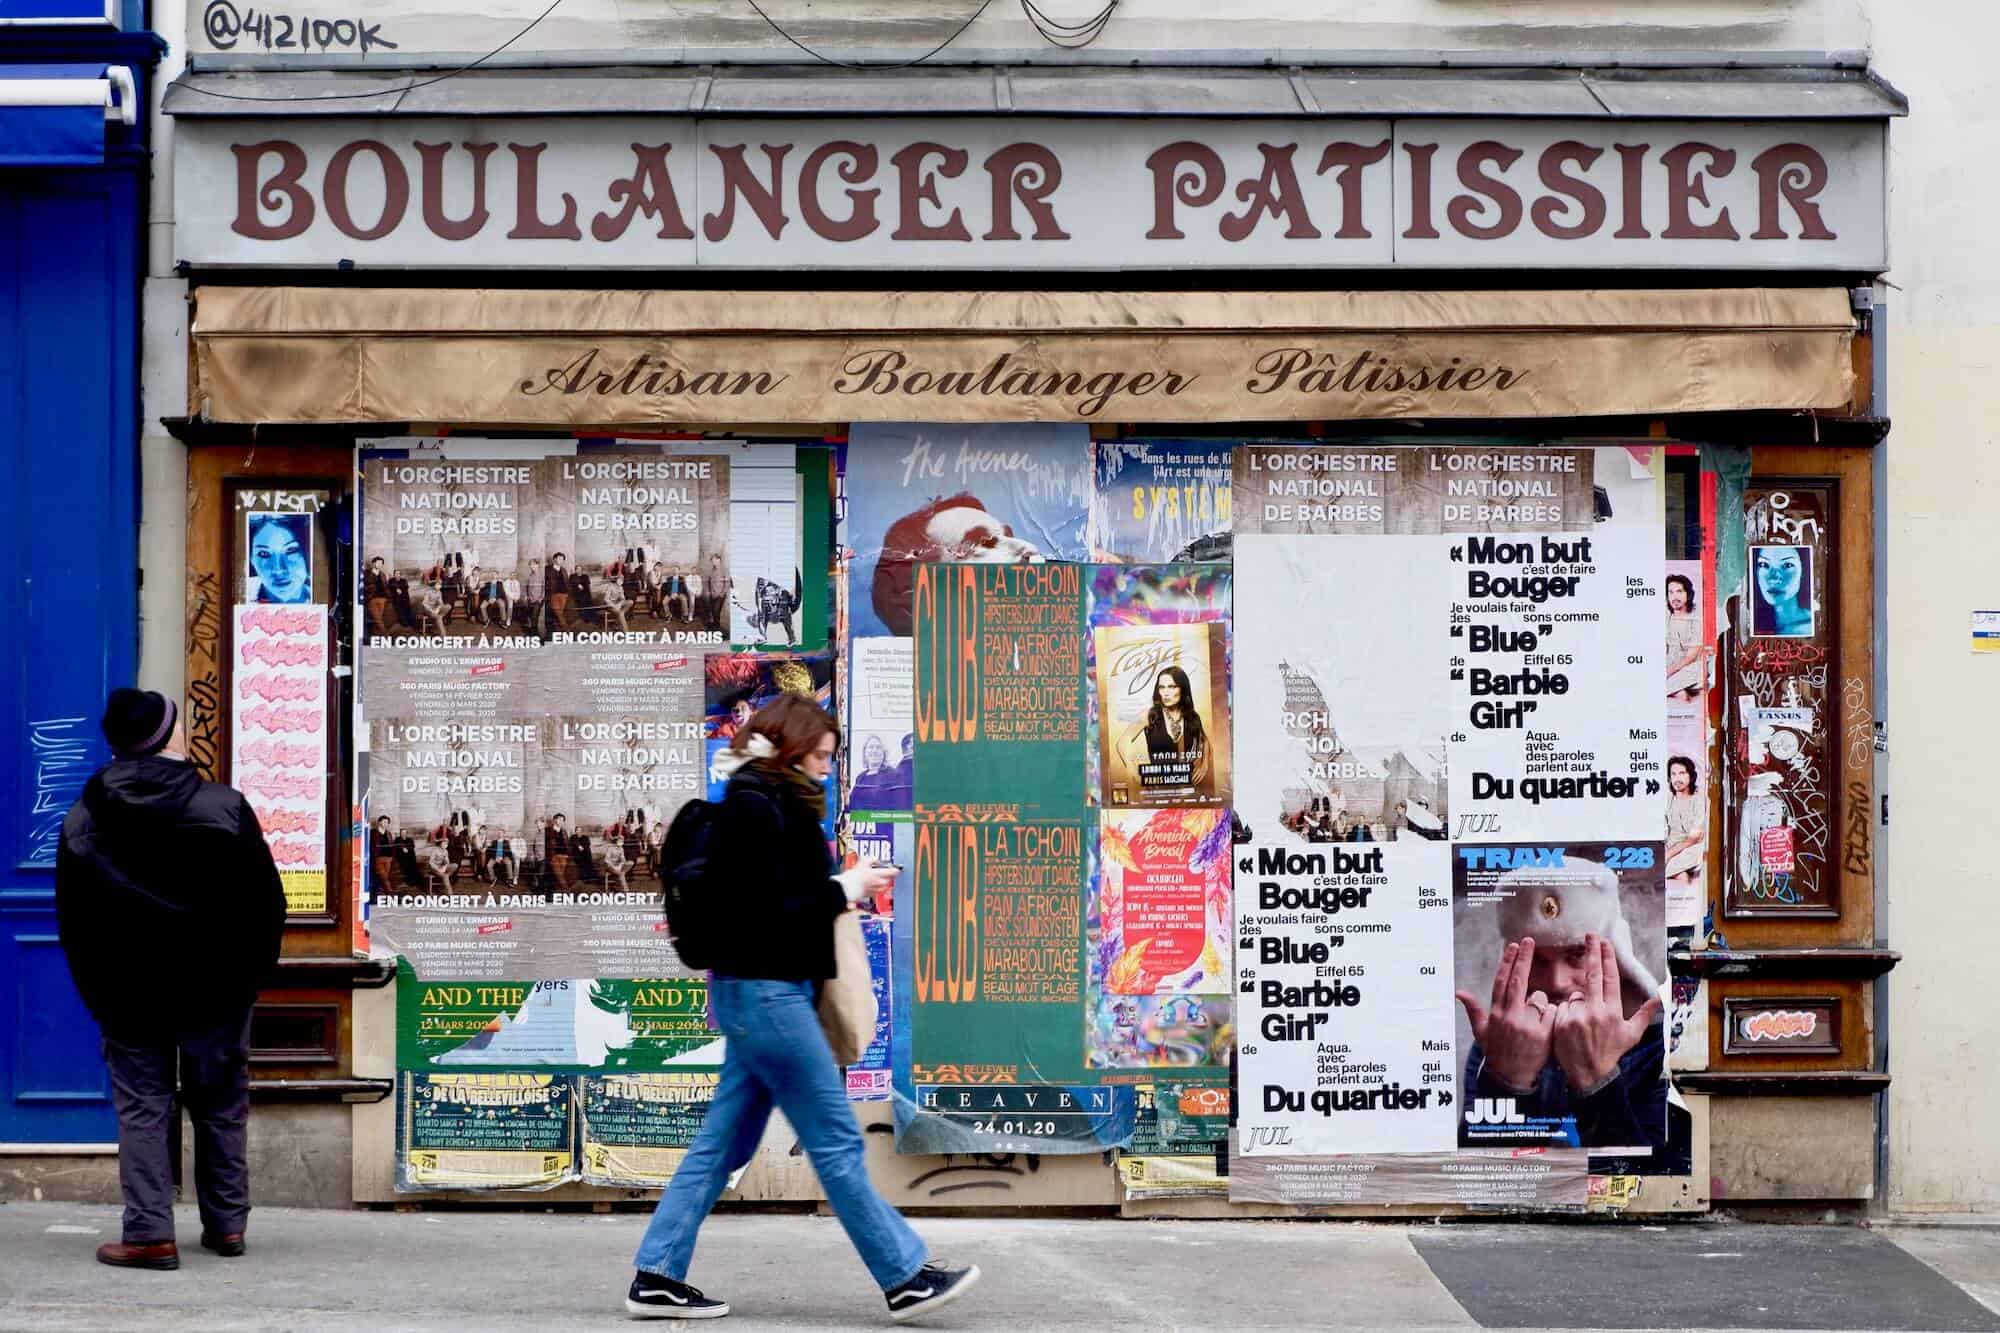 An old boulanger/patissier that has been covered in promotional music posters. An elderly man to the left is looking up at the posters while a young woman is walking past, slightly blurred.